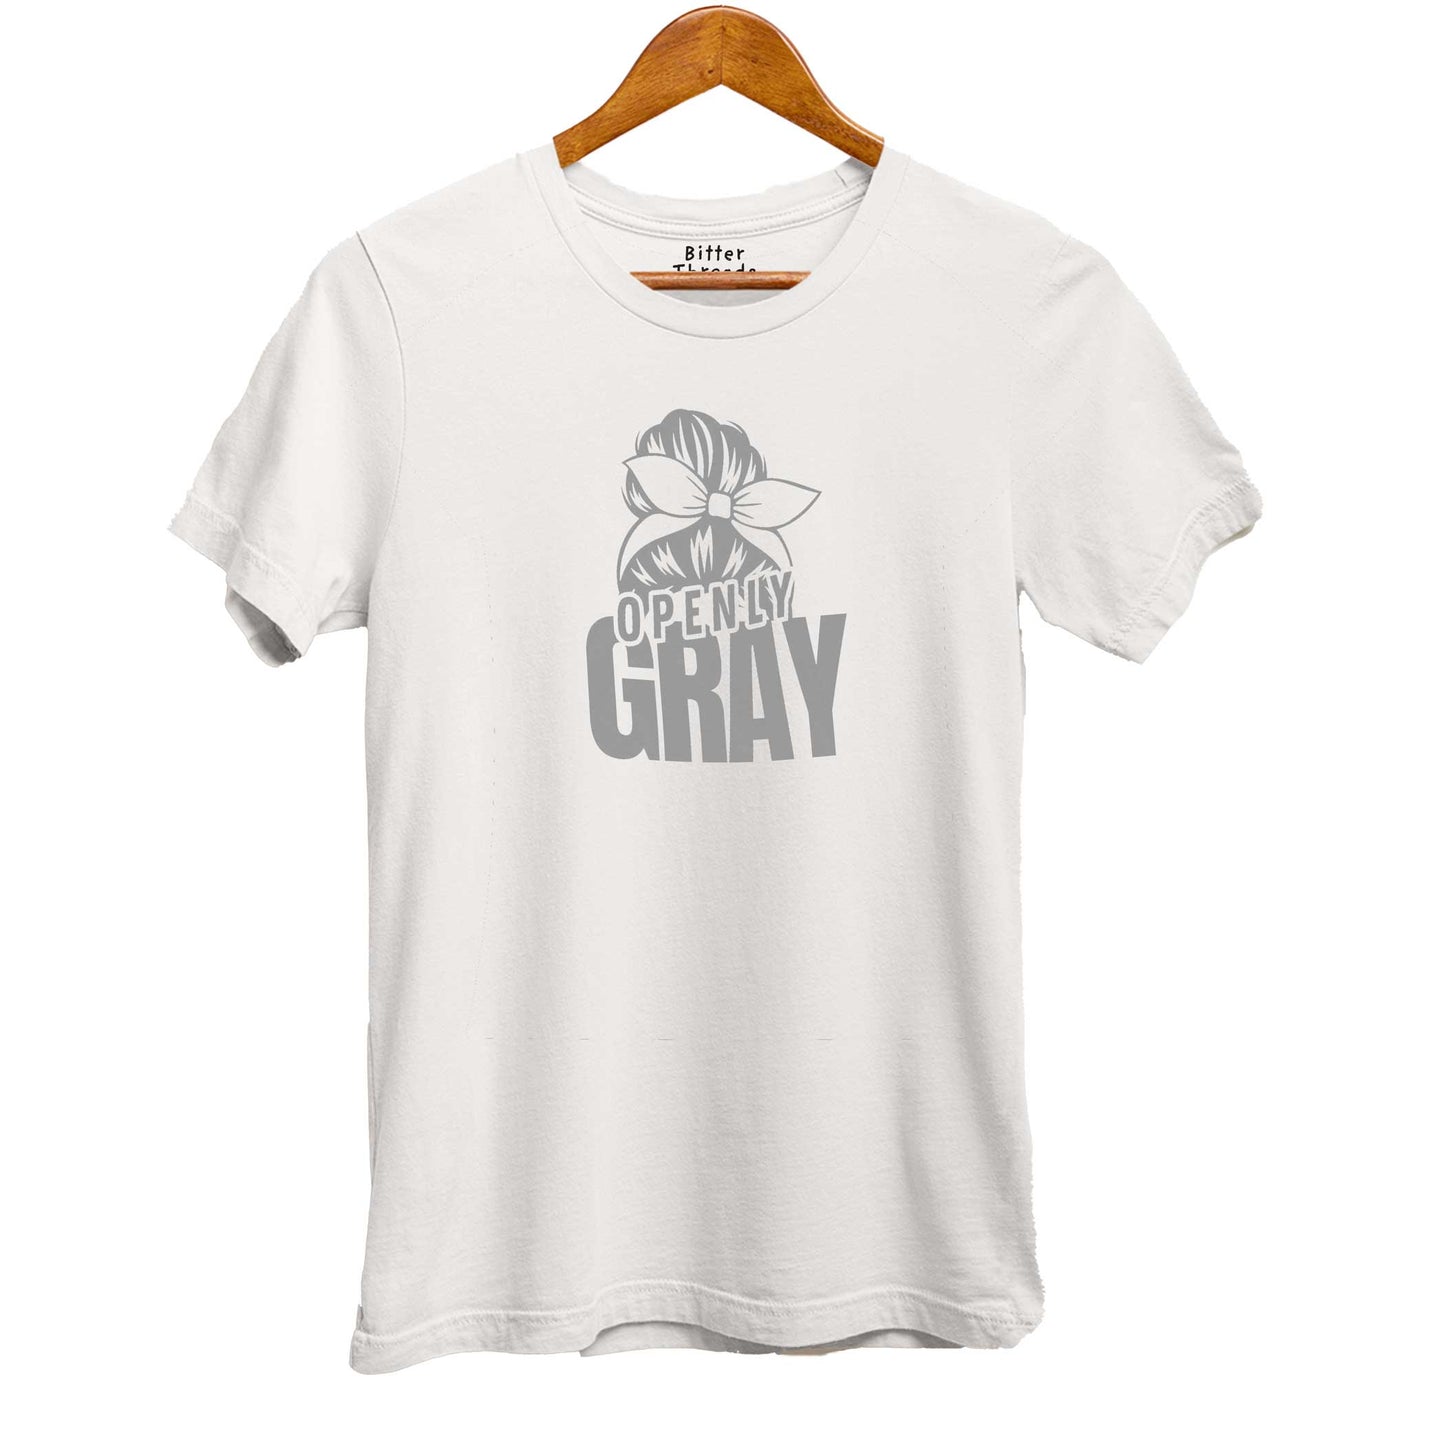 Openly Gray Unisex Organic Cotton T-Shirt Made In The USA